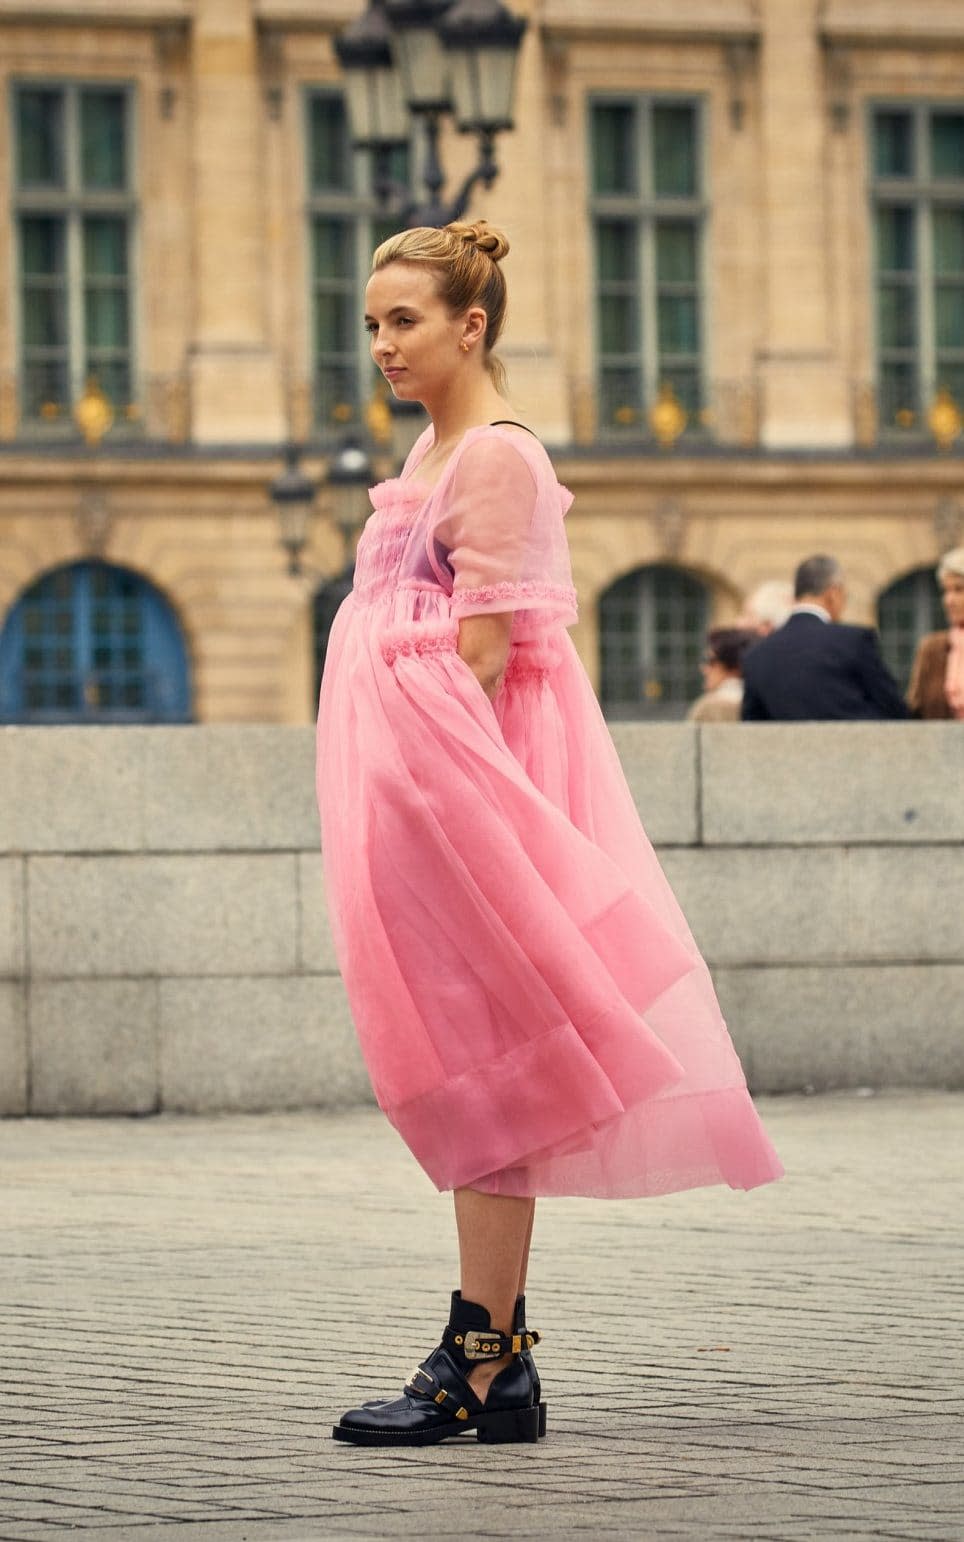 Jodie Comer wearing Molly Goddard tulle as character Villanelle in Killing Eve - BBC